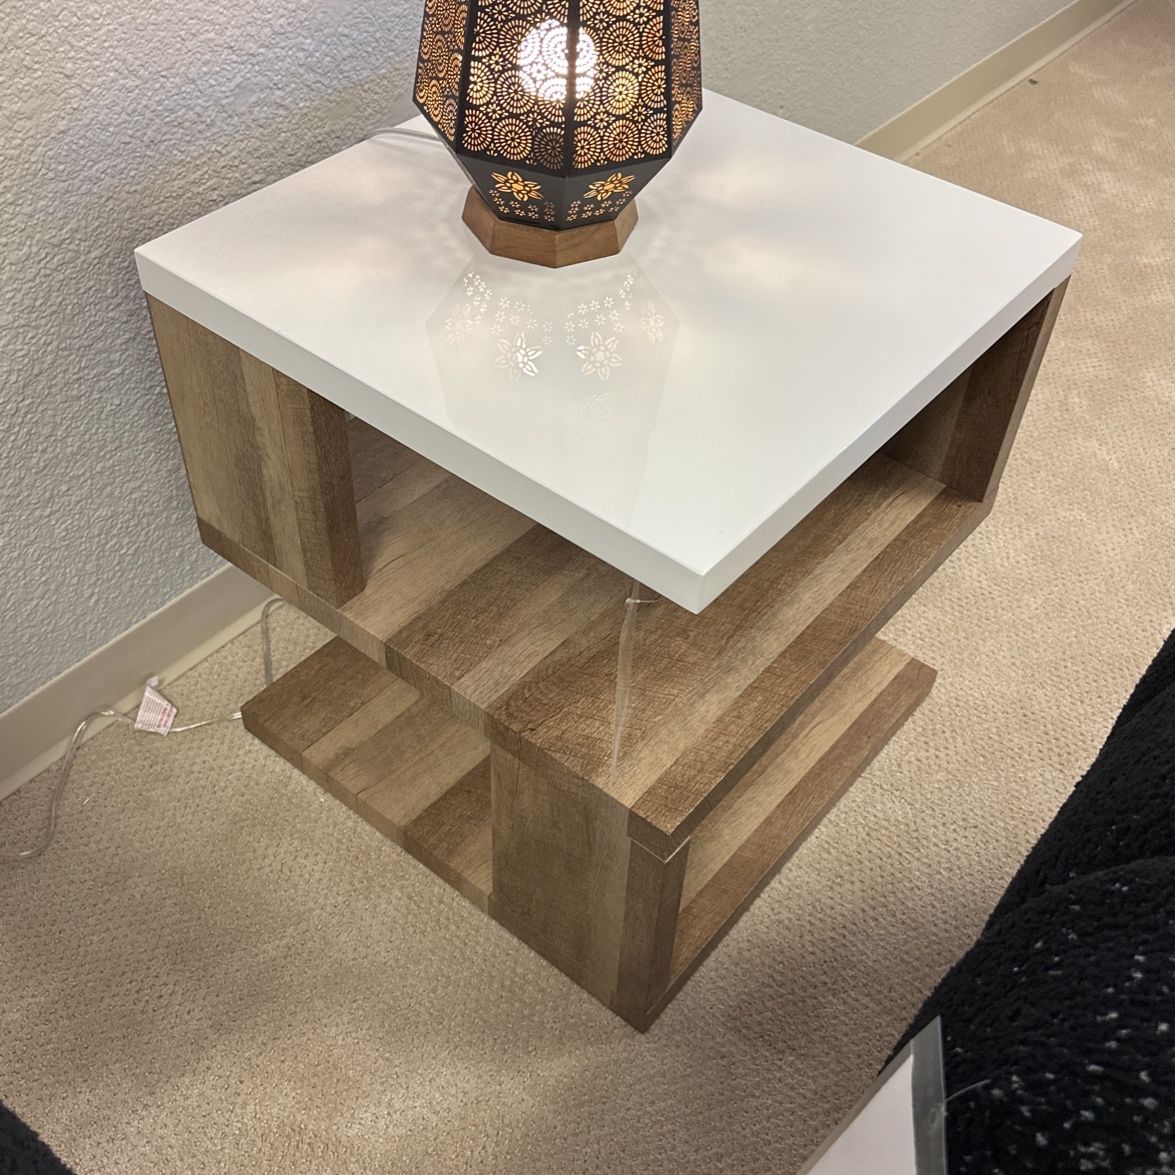 ✅End Table Contemporary, Finish, White Natural Tone, Solid Wood, High Gloss Lacquer,(in store Item 